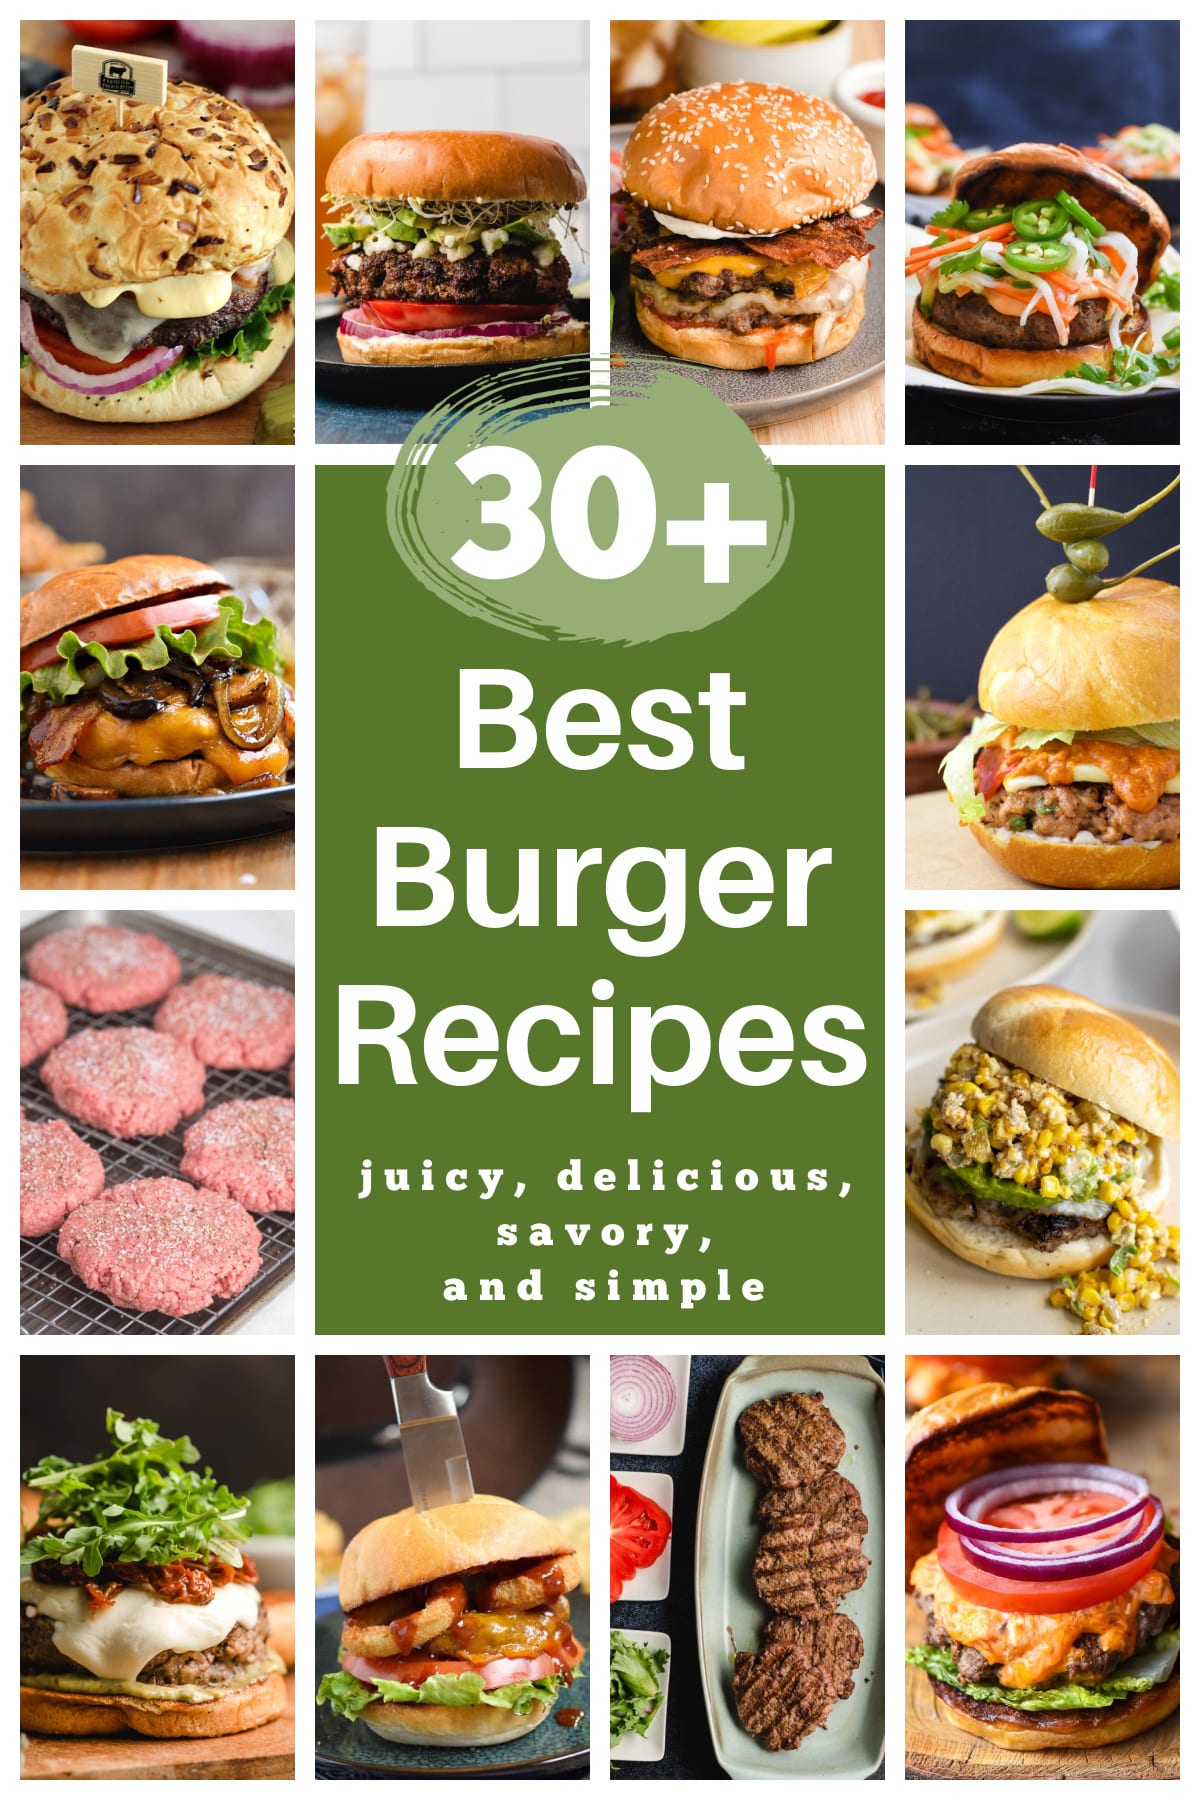 A banner featuring various burger images.